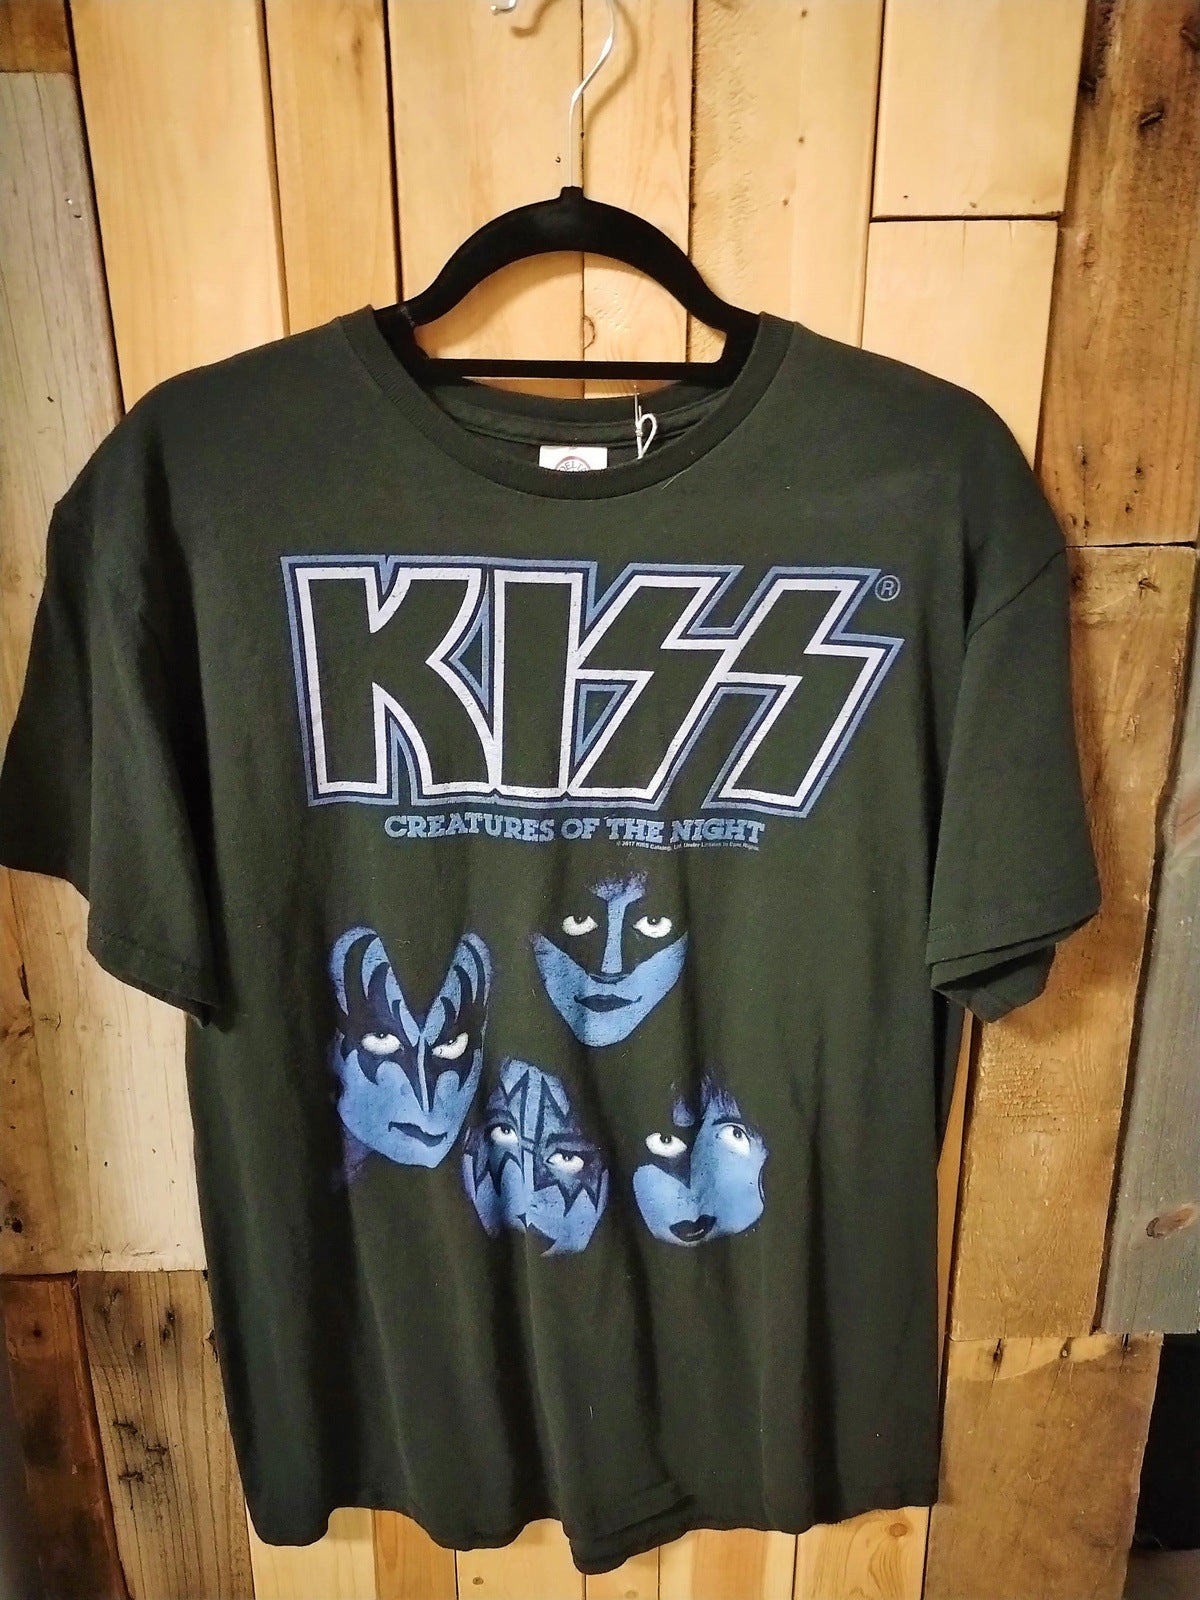 KISS "Creatures of the Night" T Shirt Size Large